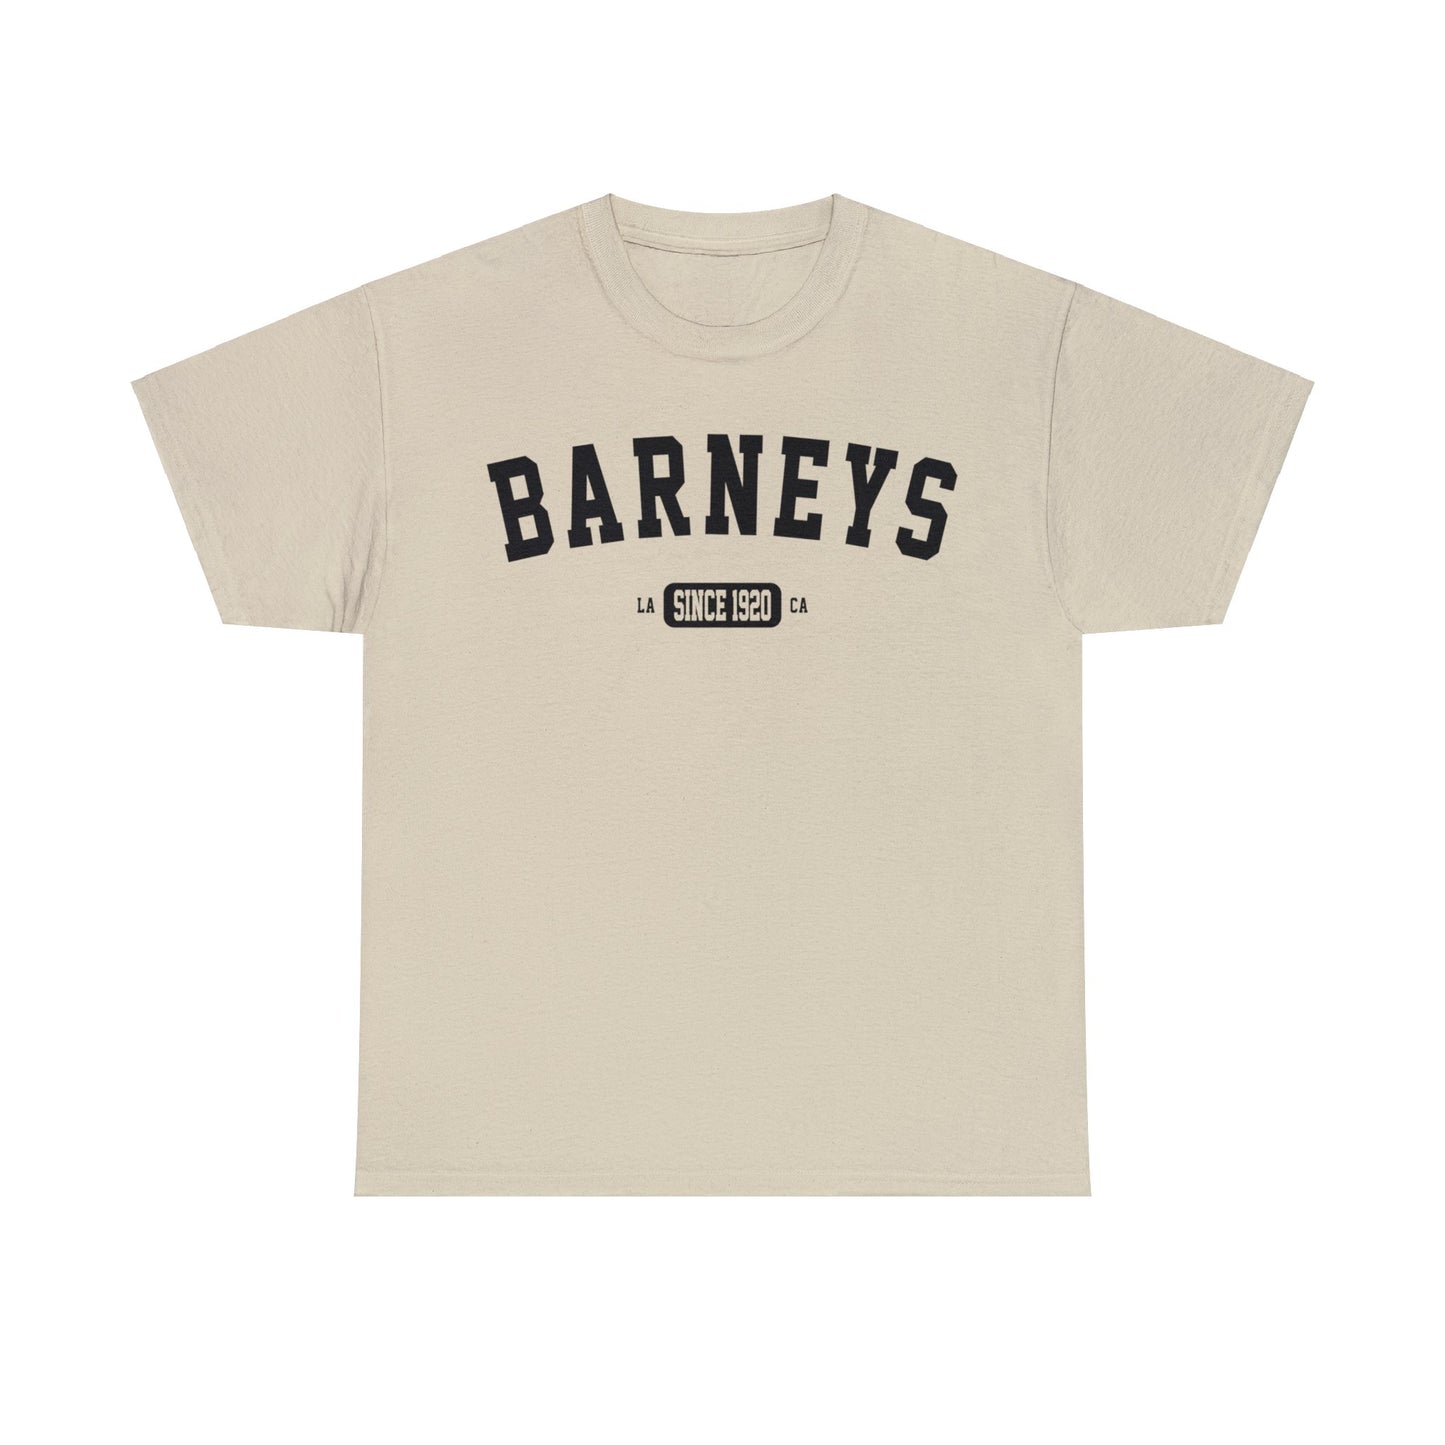 Vintage Collegiate | BARNEY'S BEANERY - Women's Graphic Tee | Sand Gildan 5000 T-Shirt, Black Graphic, Front View Flat Lay